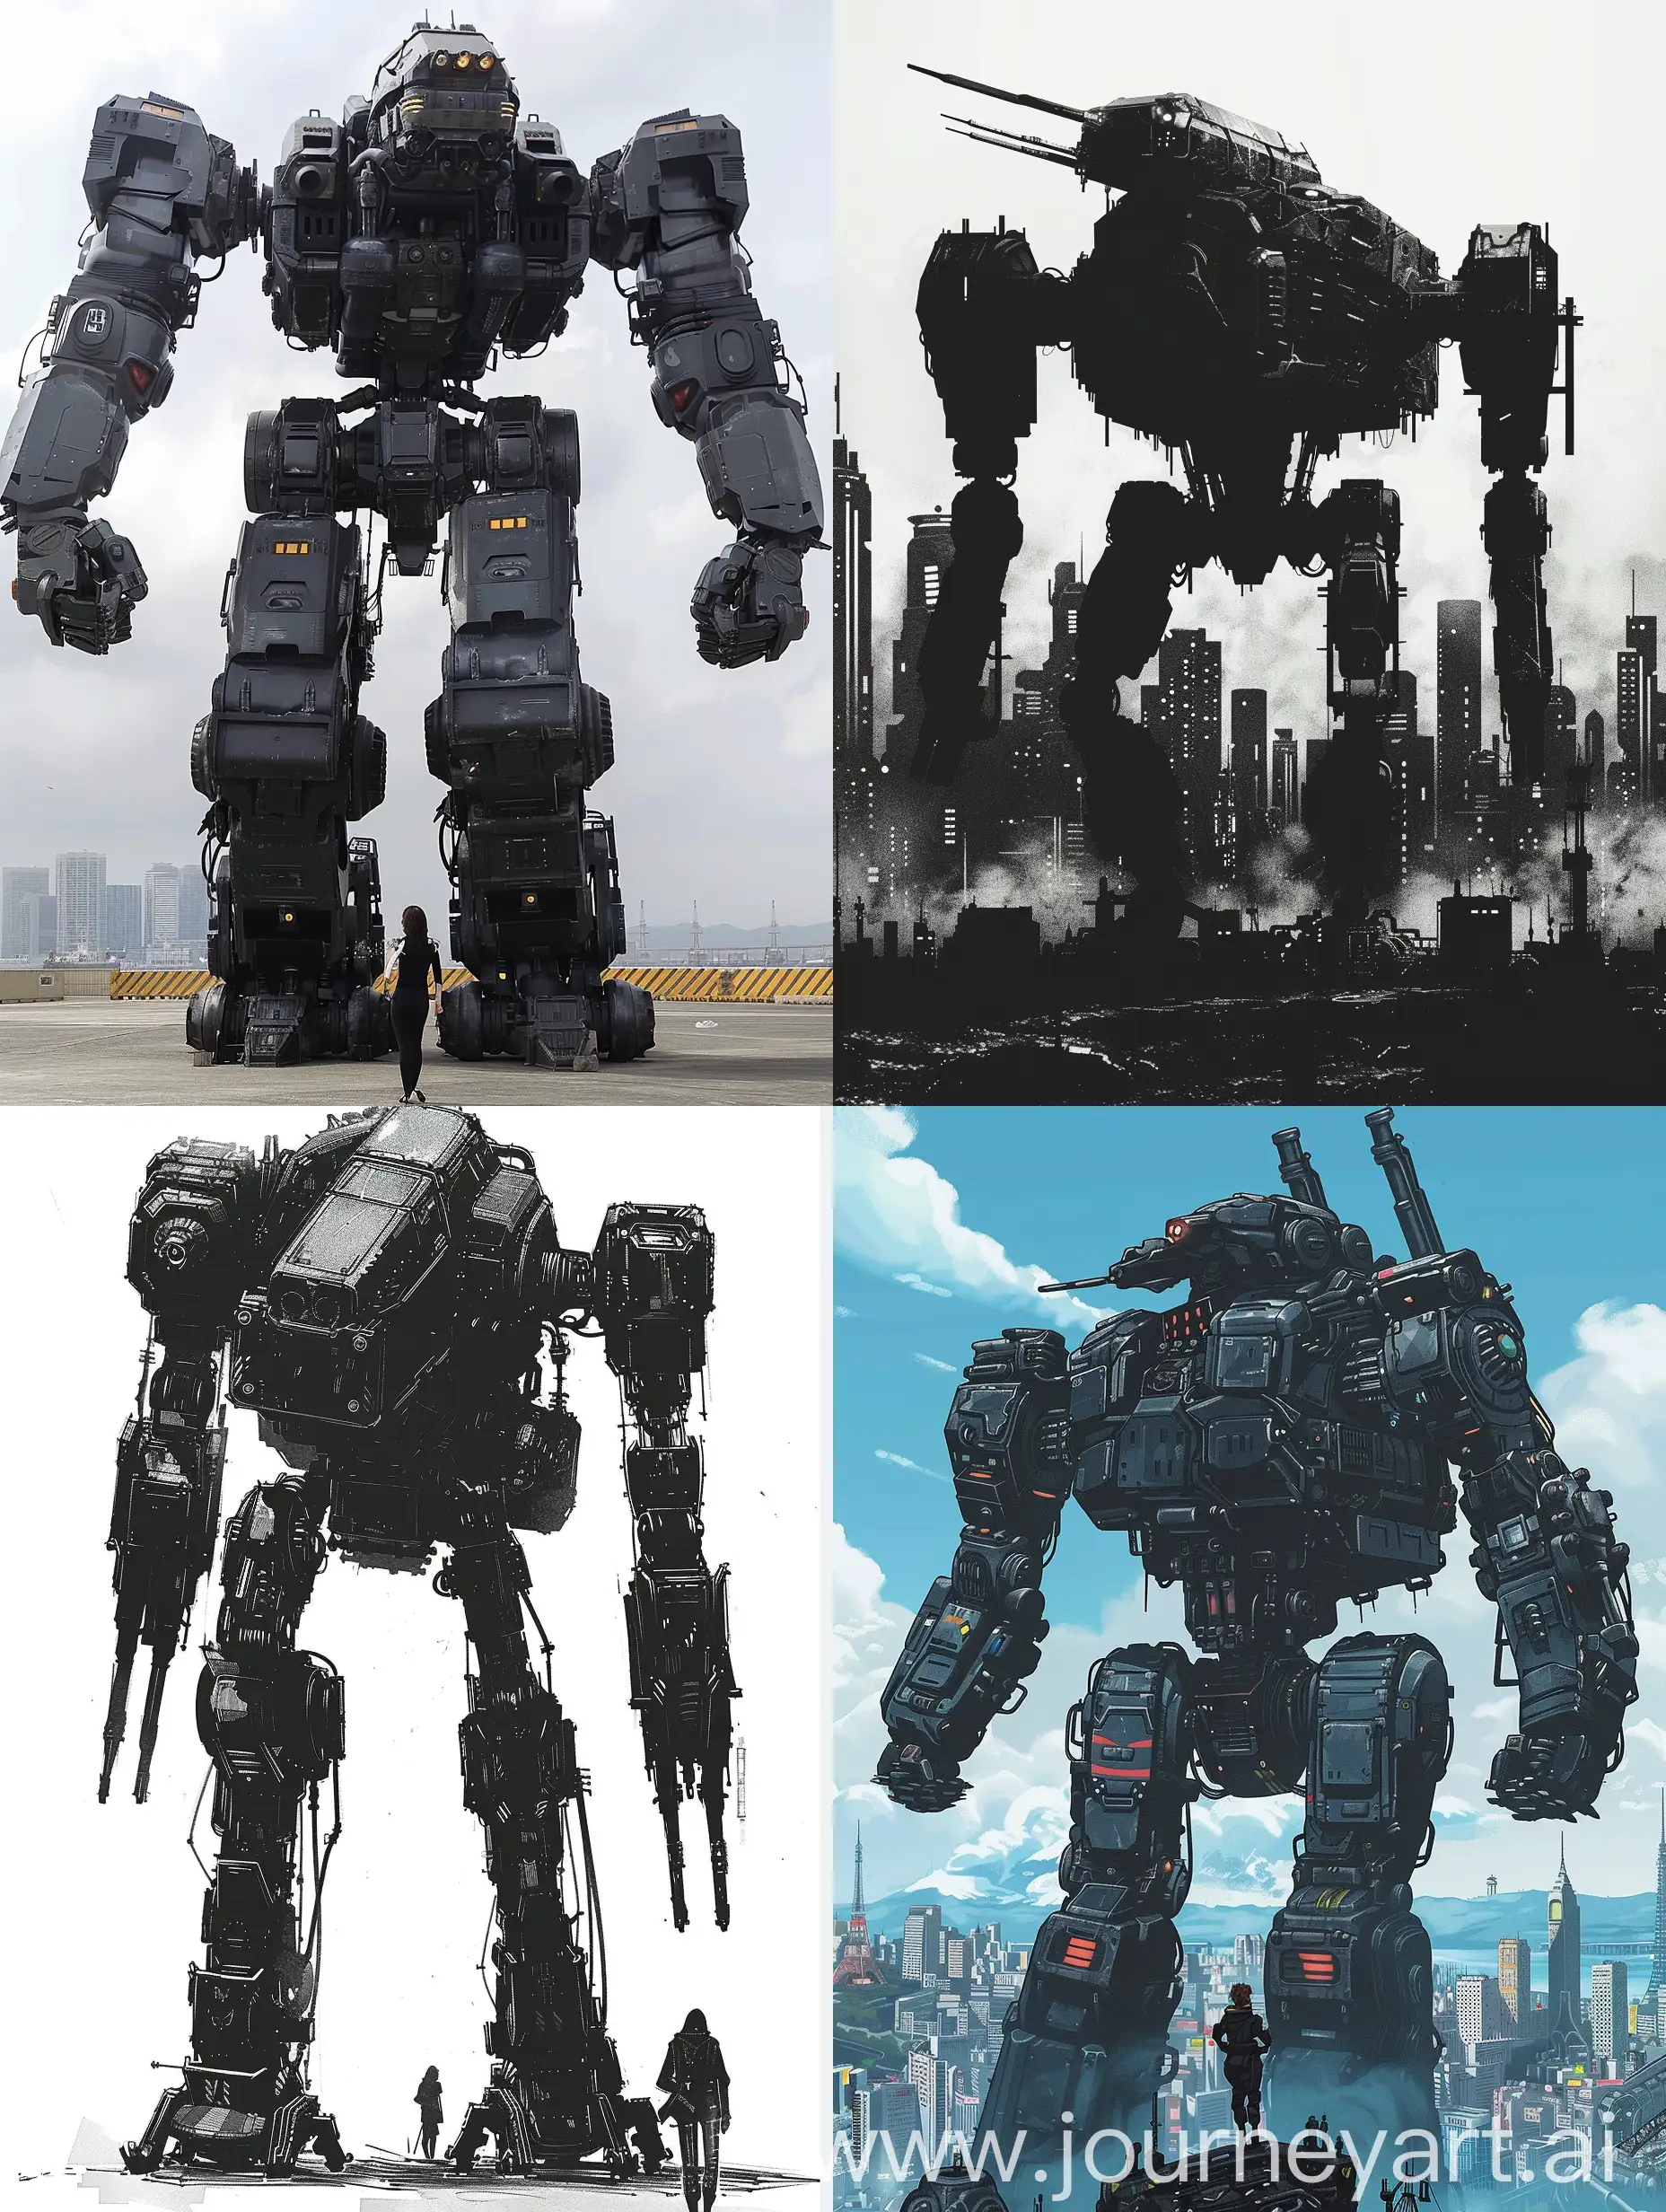 Enormous-Black-Mechas-Standing-Tall-Across-the-Pacific